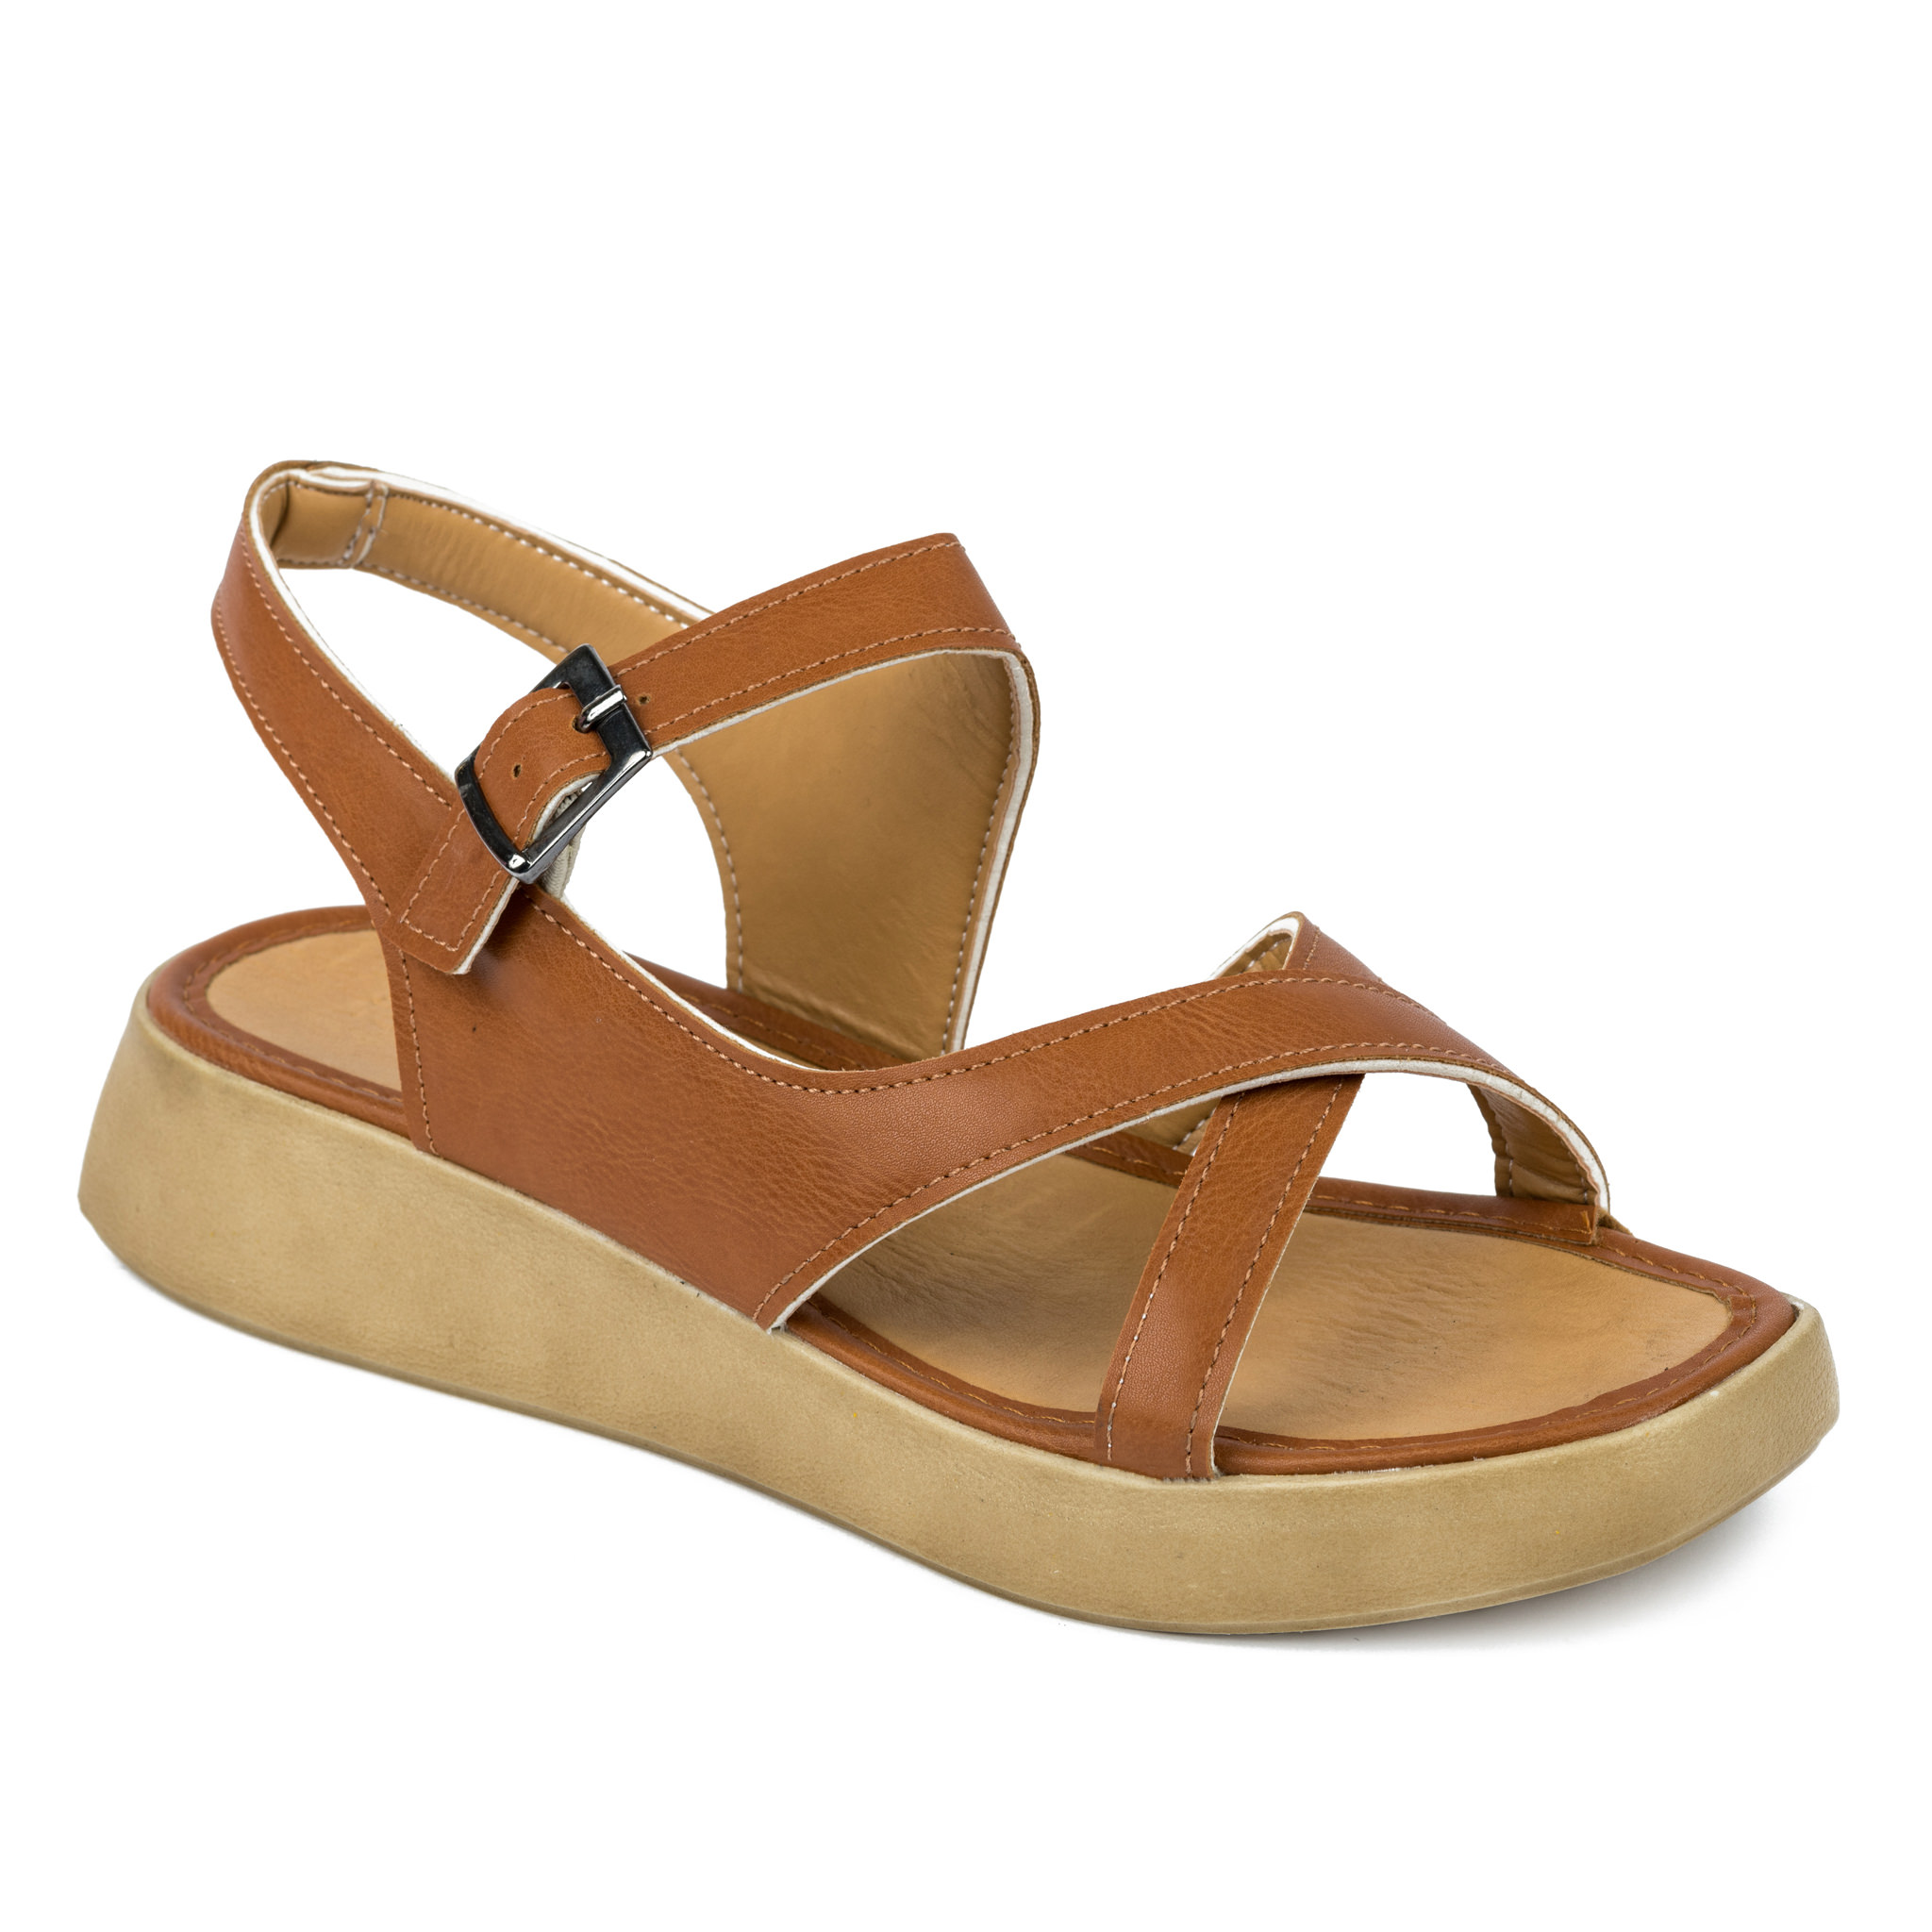 CROSS STRAP SANDALS WITH BELTS - CAMEL